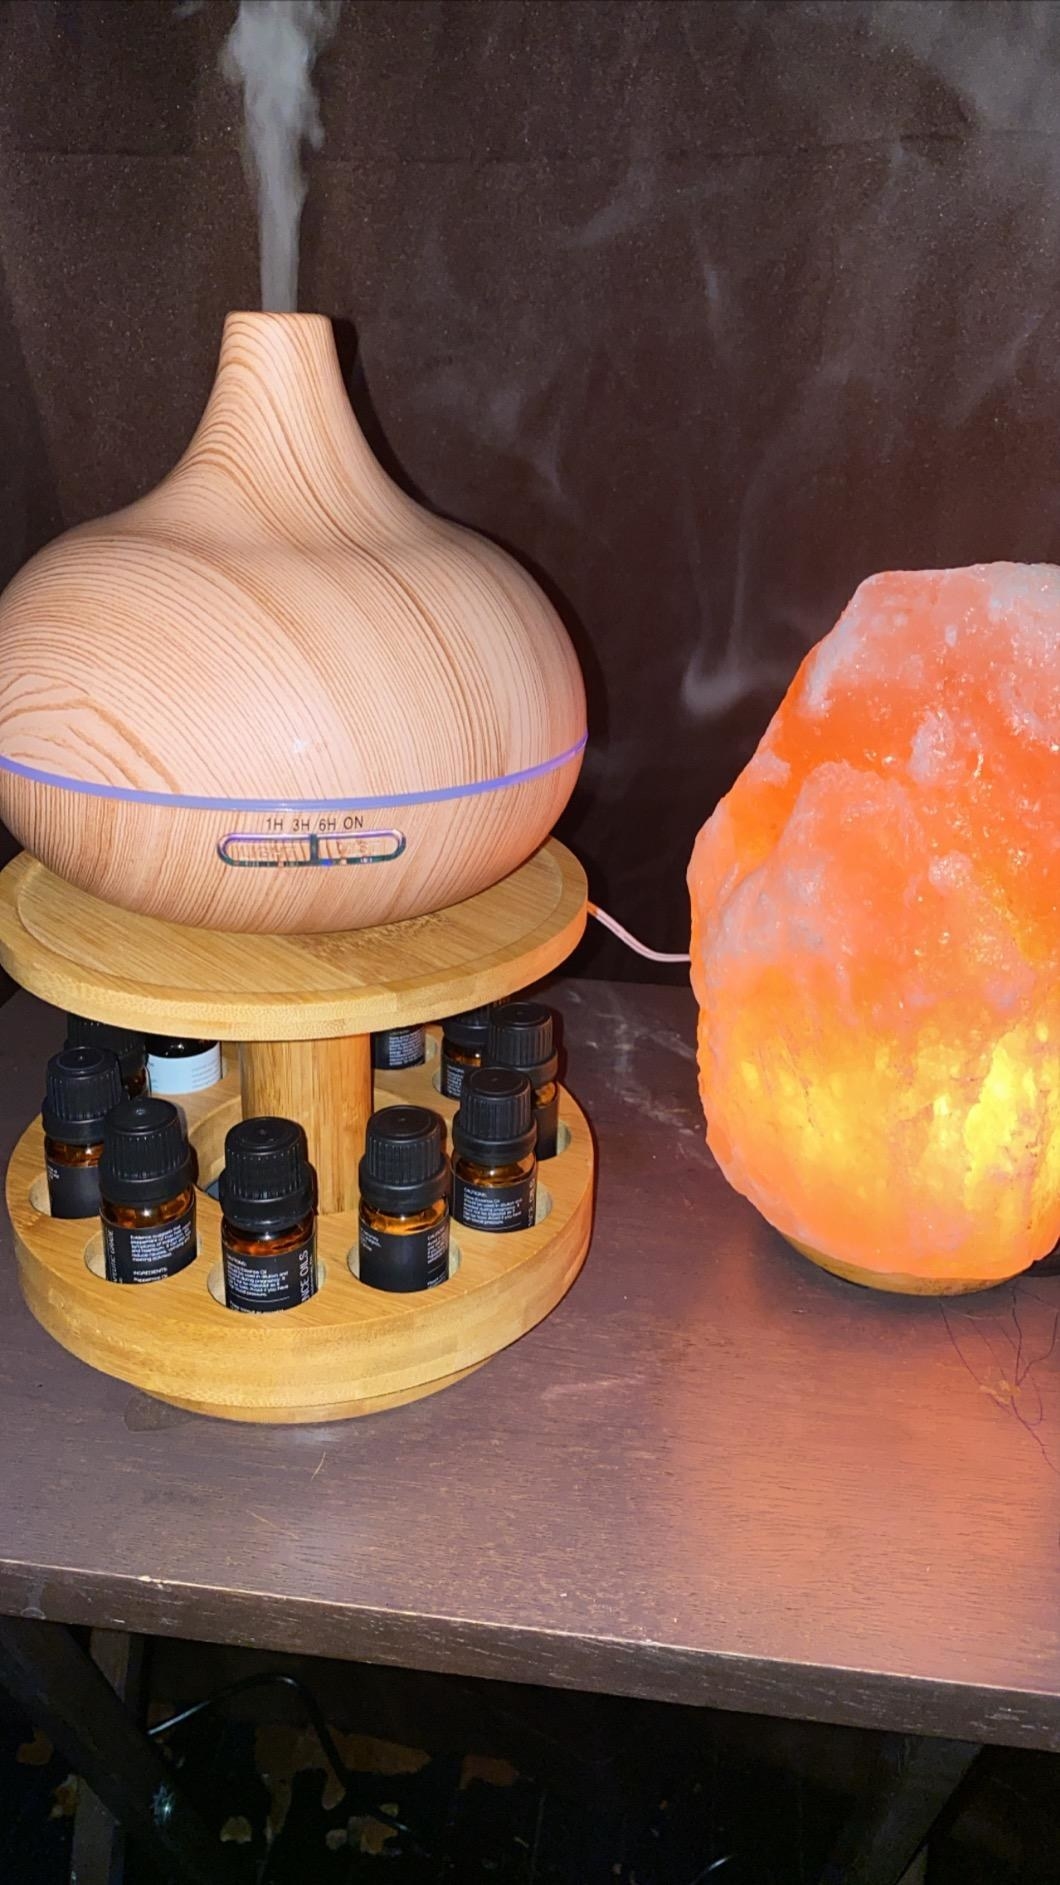 Reviewer photo of the oil diffuser with the essential oils next to a rock salt lamp